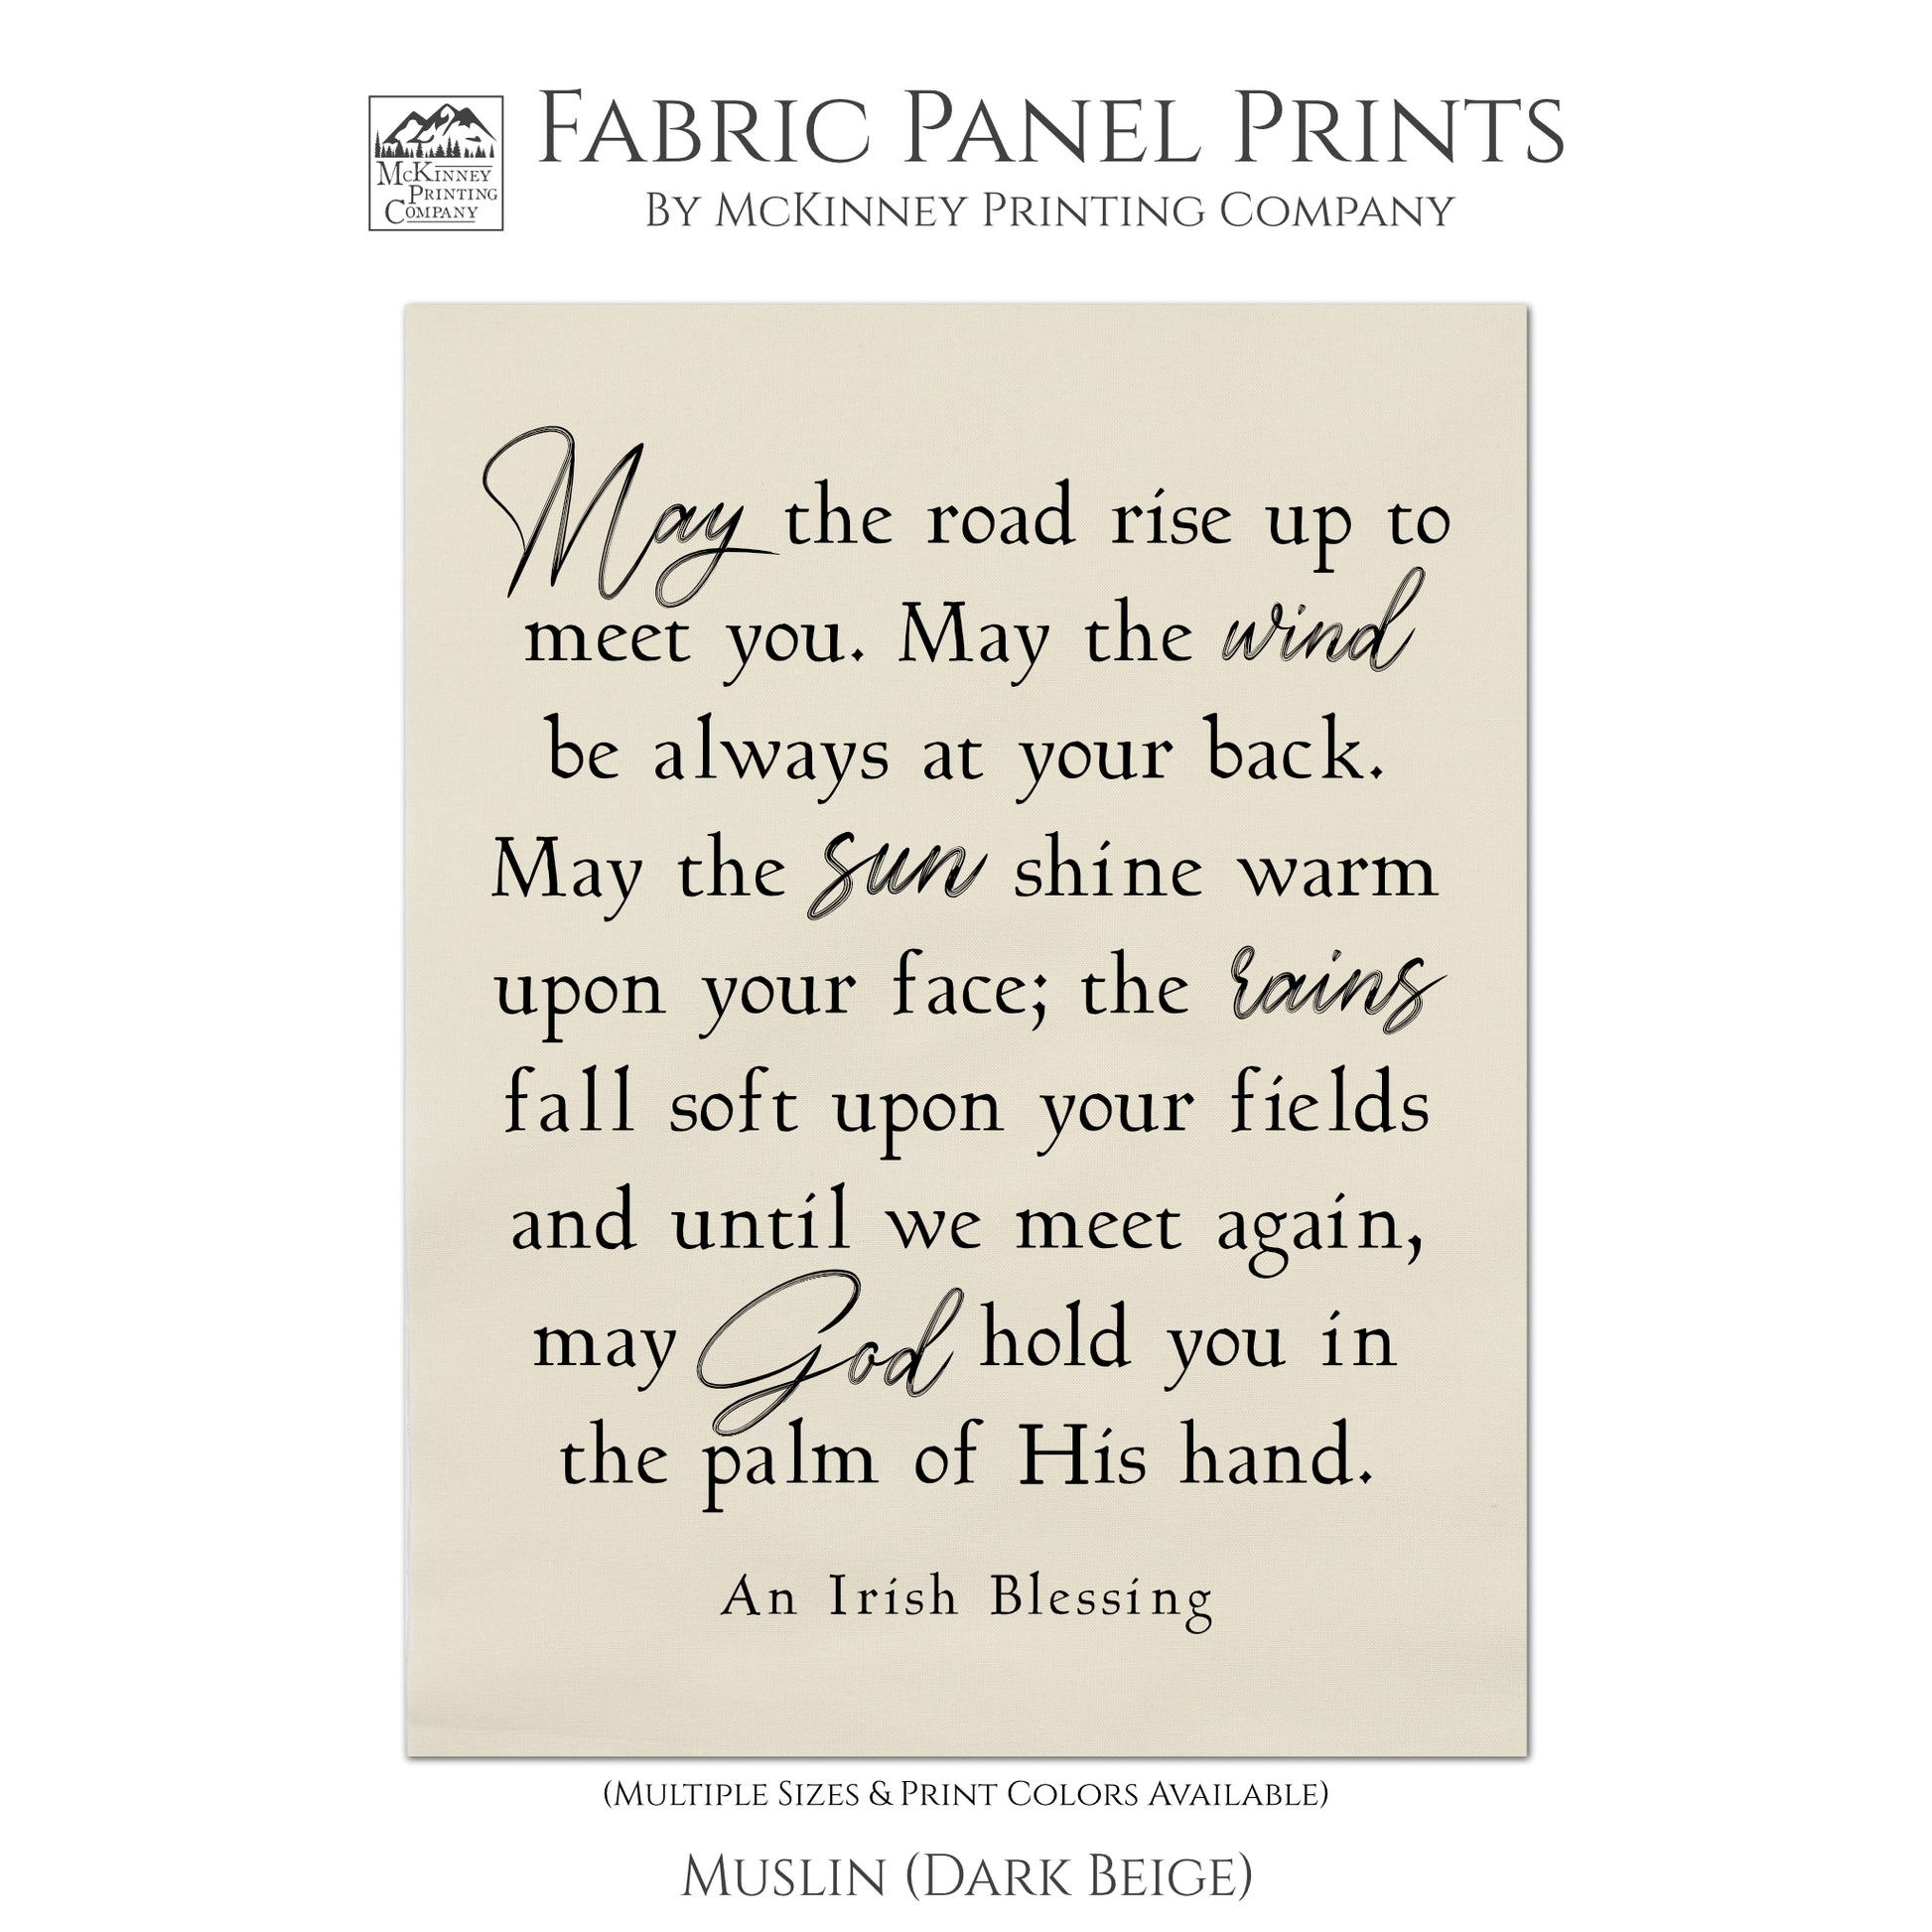 Irish Blessing, May the road rise up to meet you.  May the wind be always at your back.  May the sun shine warm upon your face; the rains fall soft upon your fields and until we meet again, may God hold you in the palm of HIs hand. Fabric , Muslin